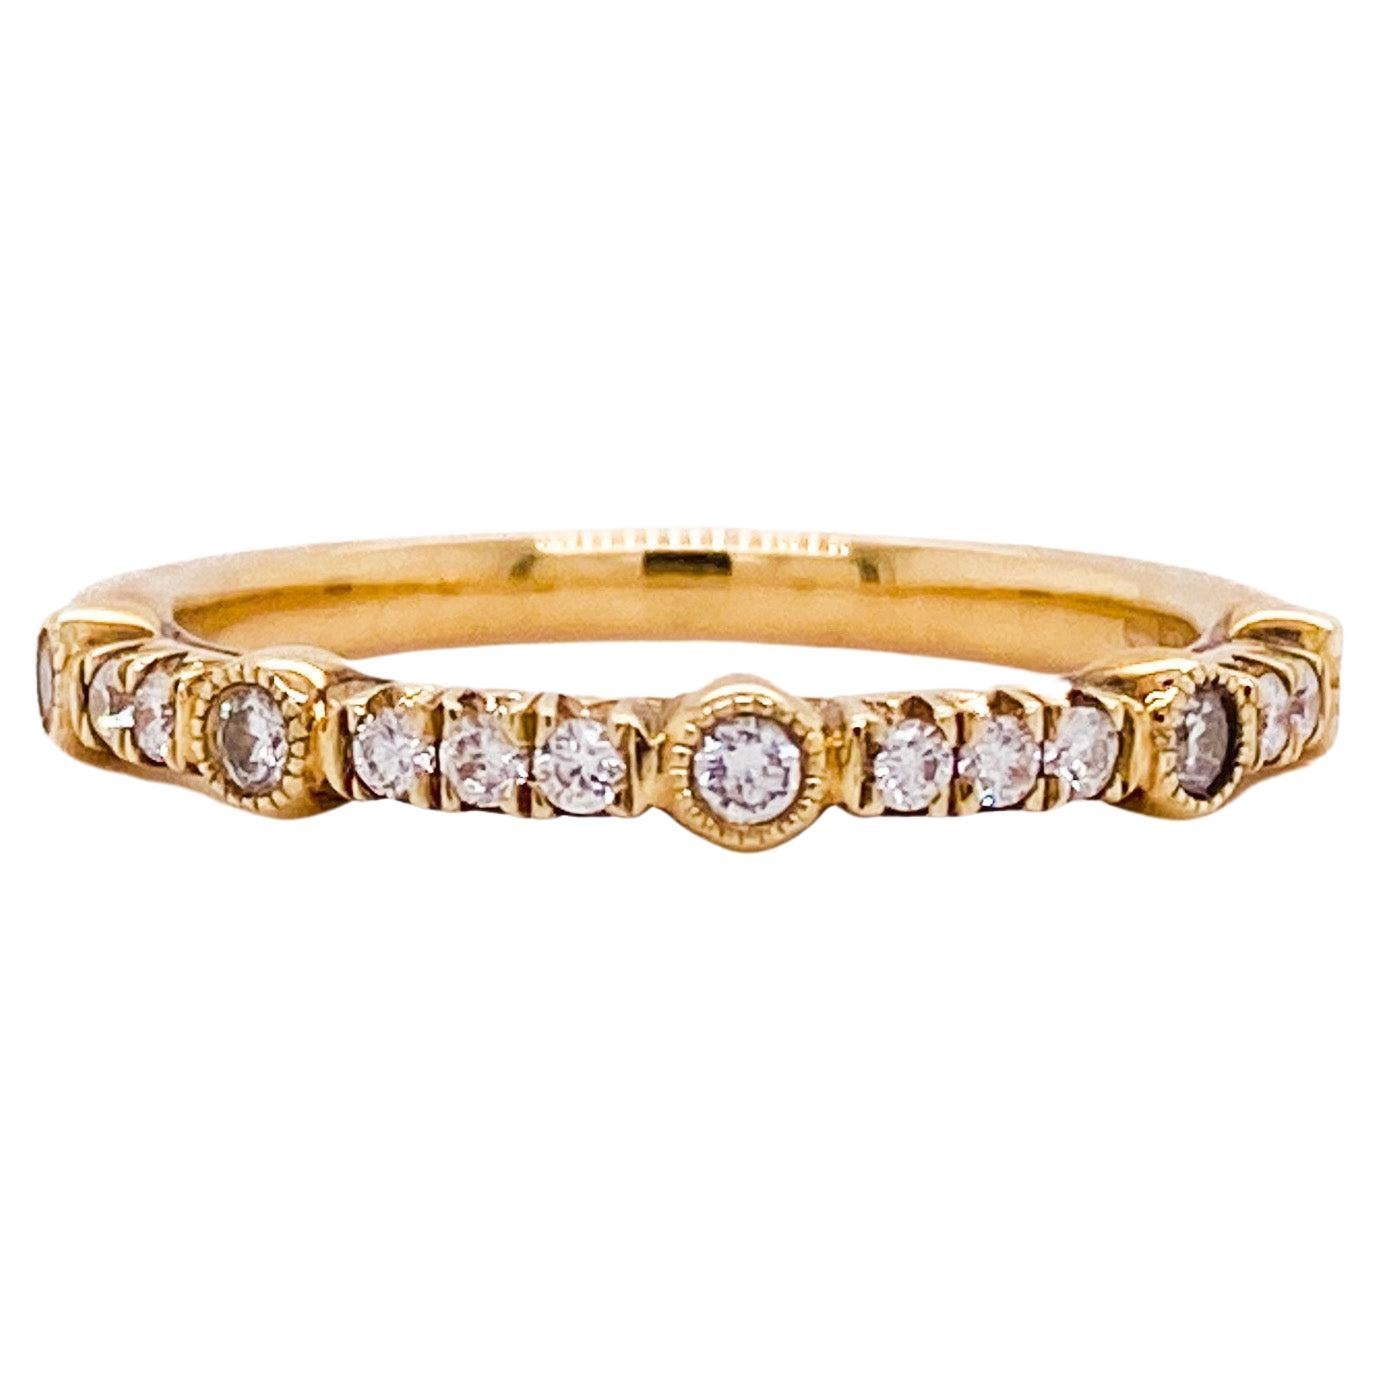 Diamond Half Band in 14k Yellow Gold 0.22 Carat Bezel and Prong Stackable Ring